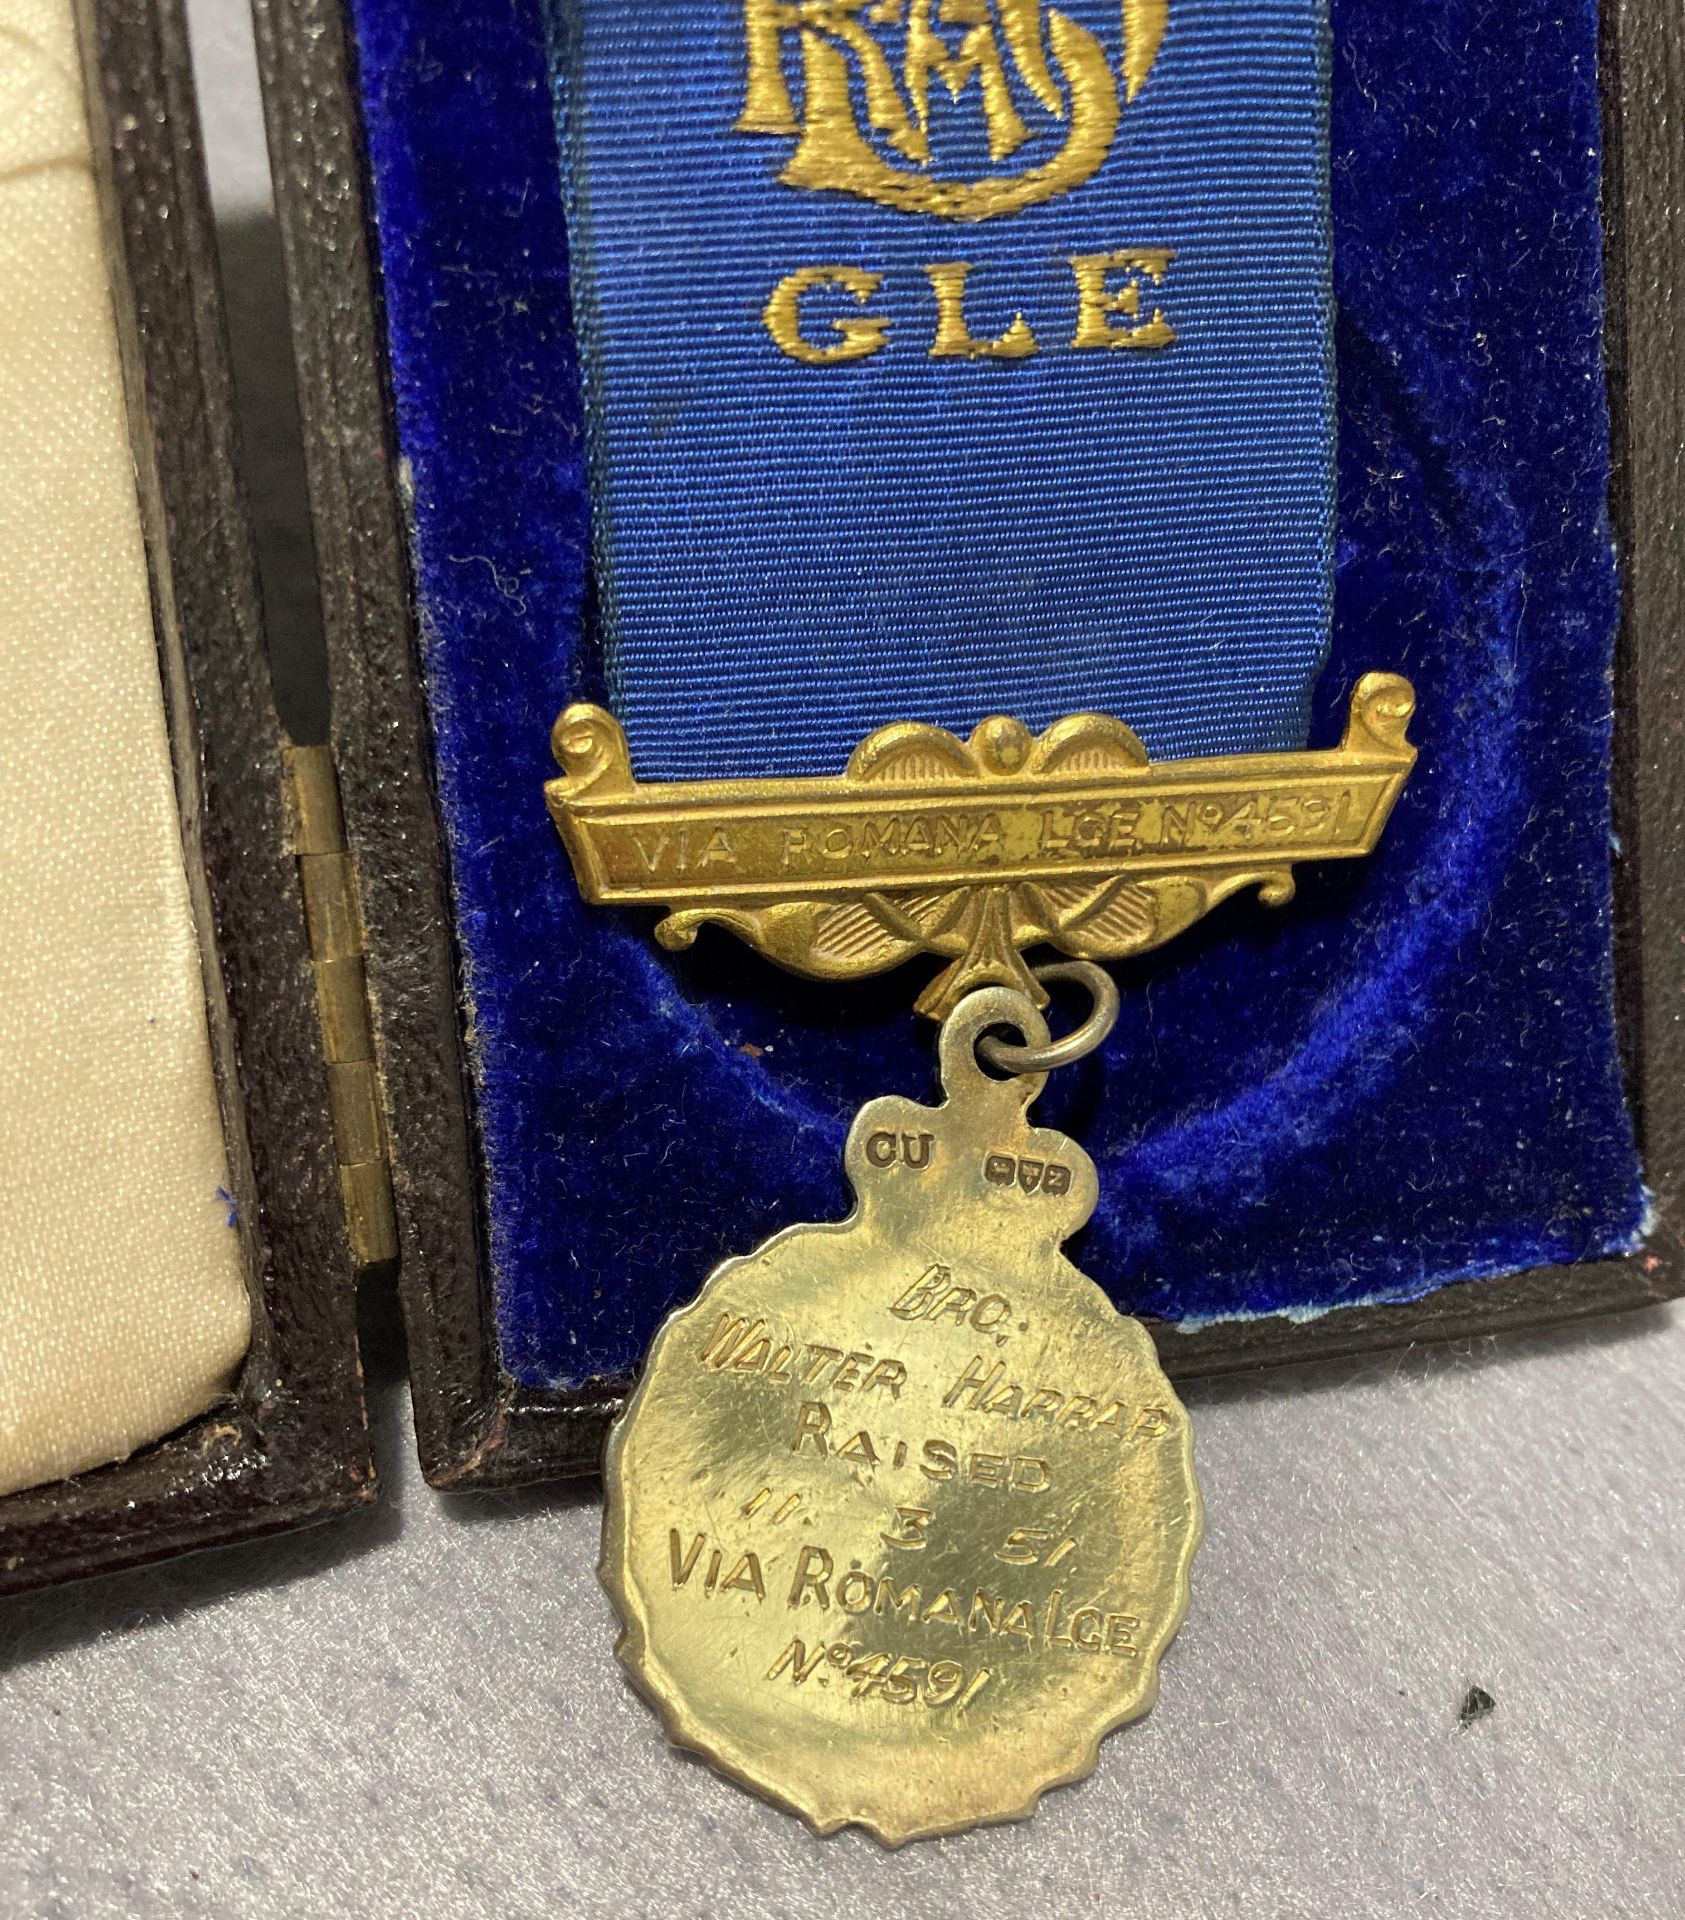 Four assorted RAOB solid silver and enamel medals Carlisle LGE 2264 GLE medal presented to W. - Image 4 of 7